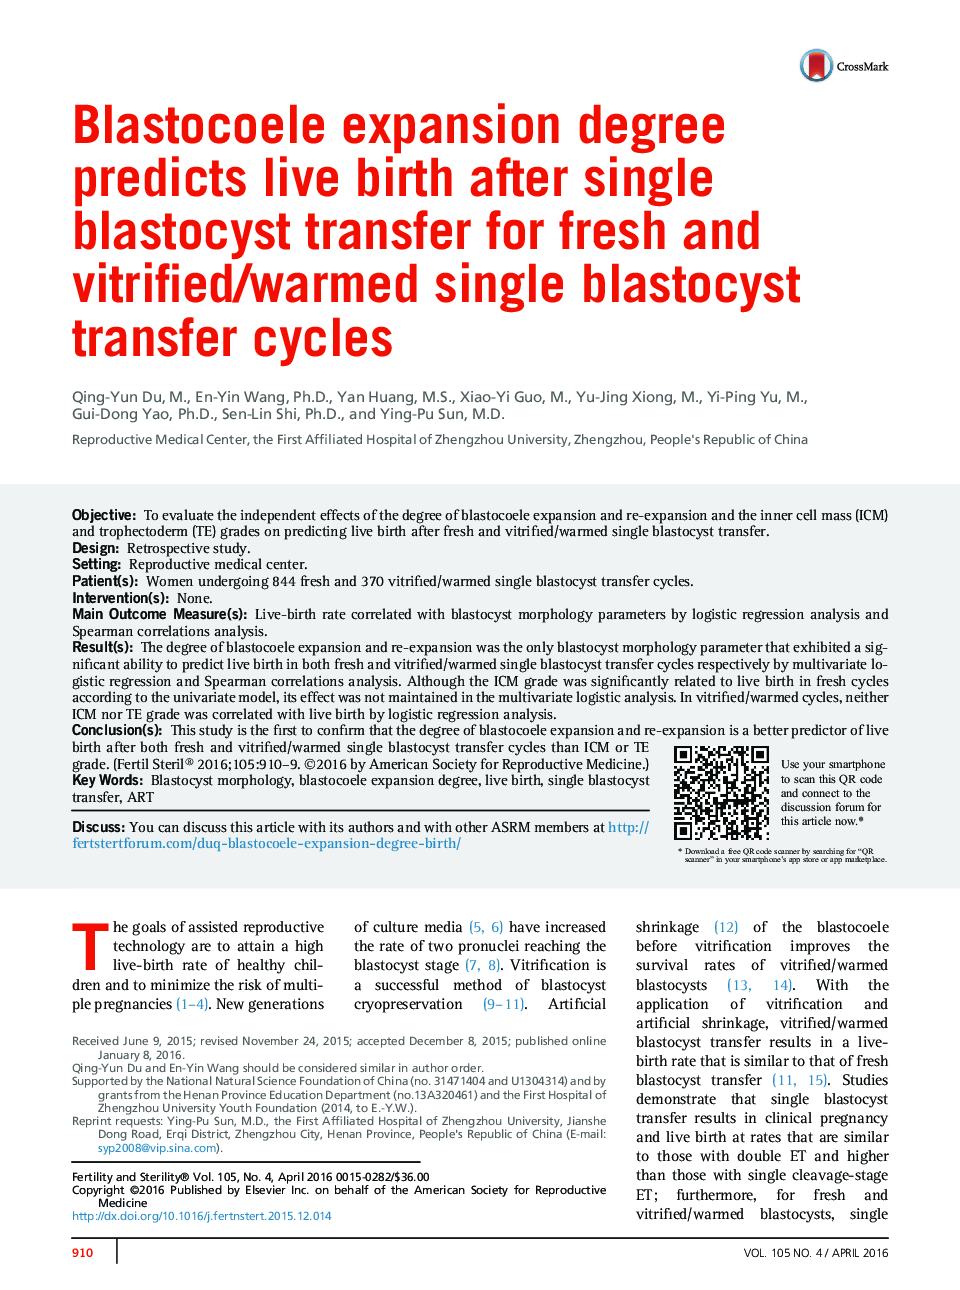 Blastocoele expansion degree predicts live birth after single blastocyst transfer for fresh and vitrified/warmed single blastocyst transfer cycles